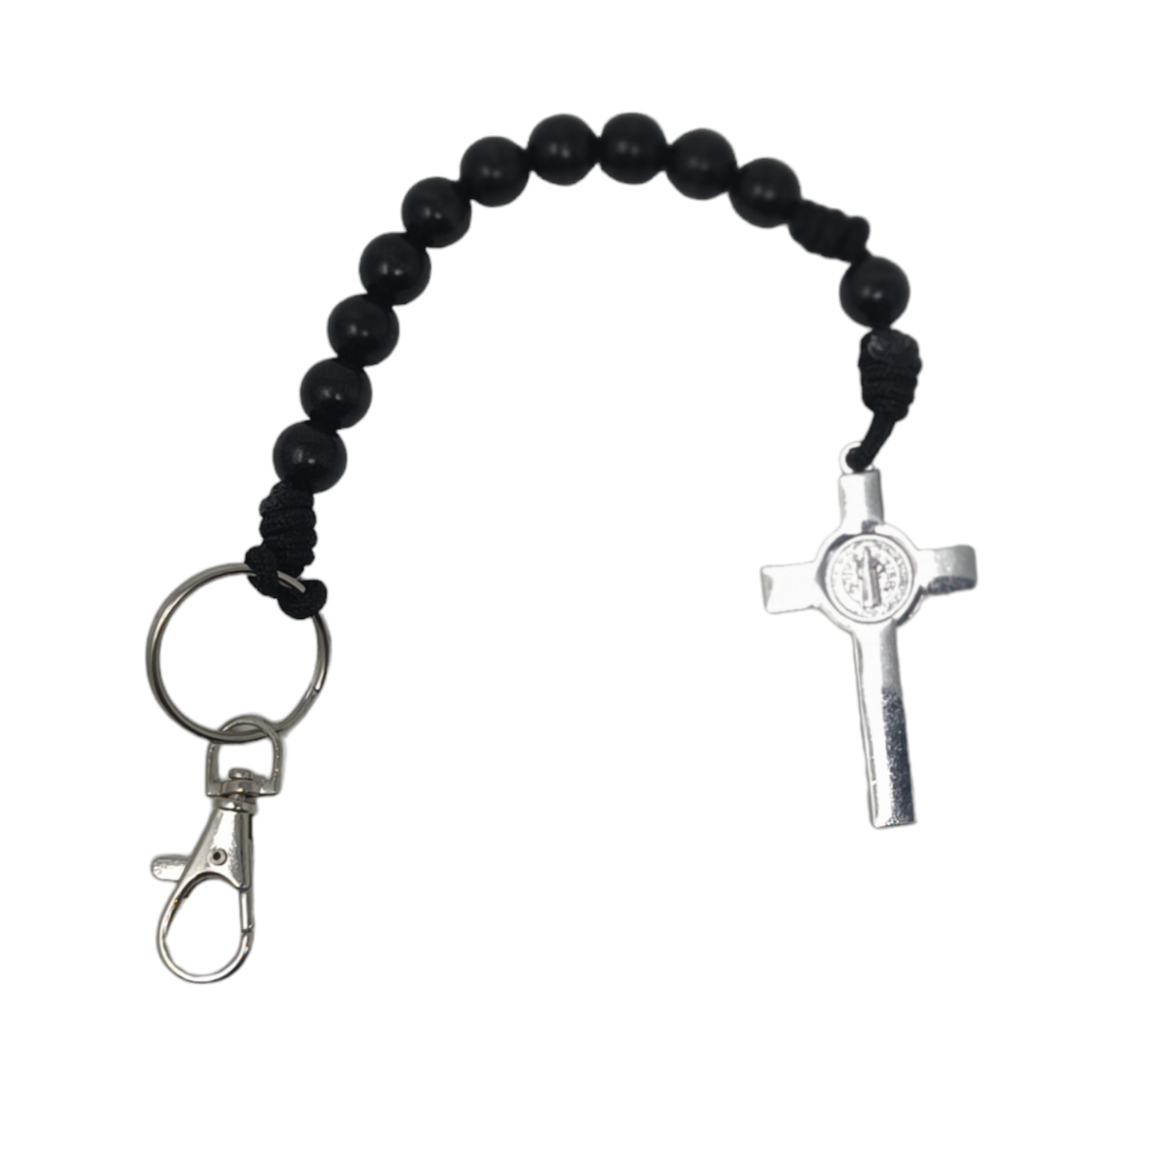 Paracord Black Rosary keyring, Silver St Benedict crucifix, One decade metal & knot Rosary, Strong, Catholic Rosary, Pilgrimages, Knotted Rosary, Unbreakable, Waterproof